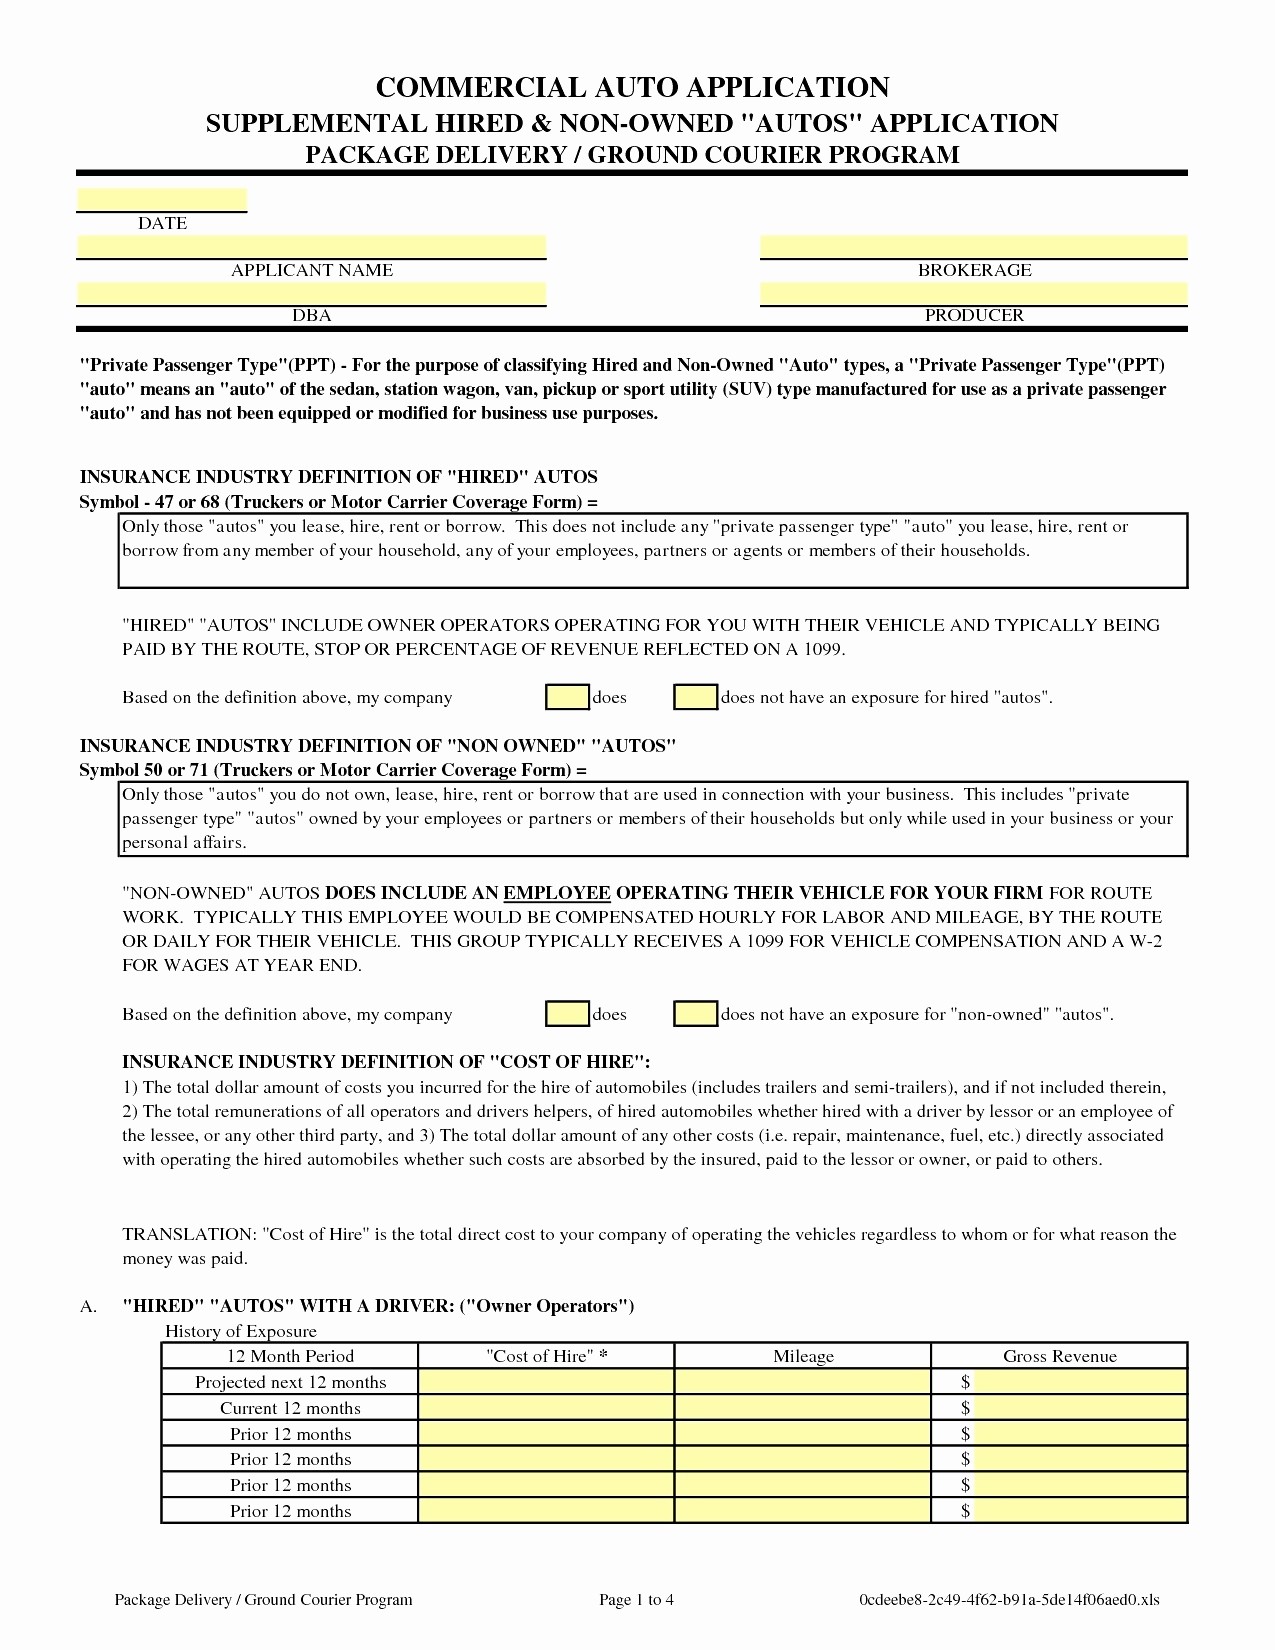 Declarations Page Homeowners Insurance Luxury Document Homeowner Declaration Sample